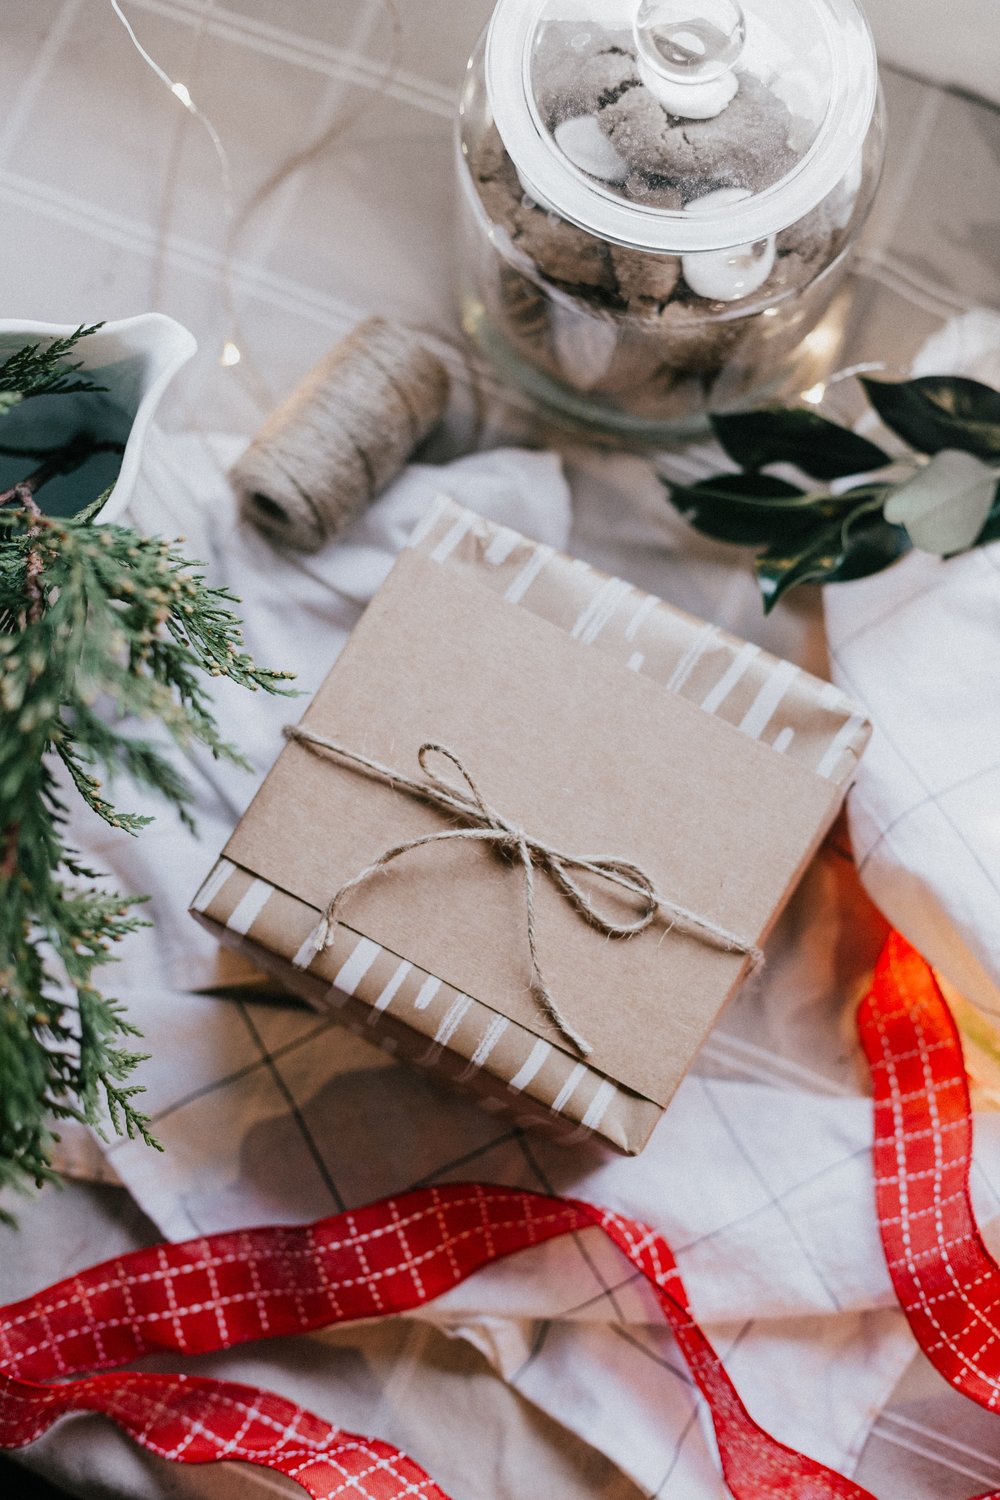 5 Reasons to Use Twine String Instead of Ribbon for Wrapping Gifts